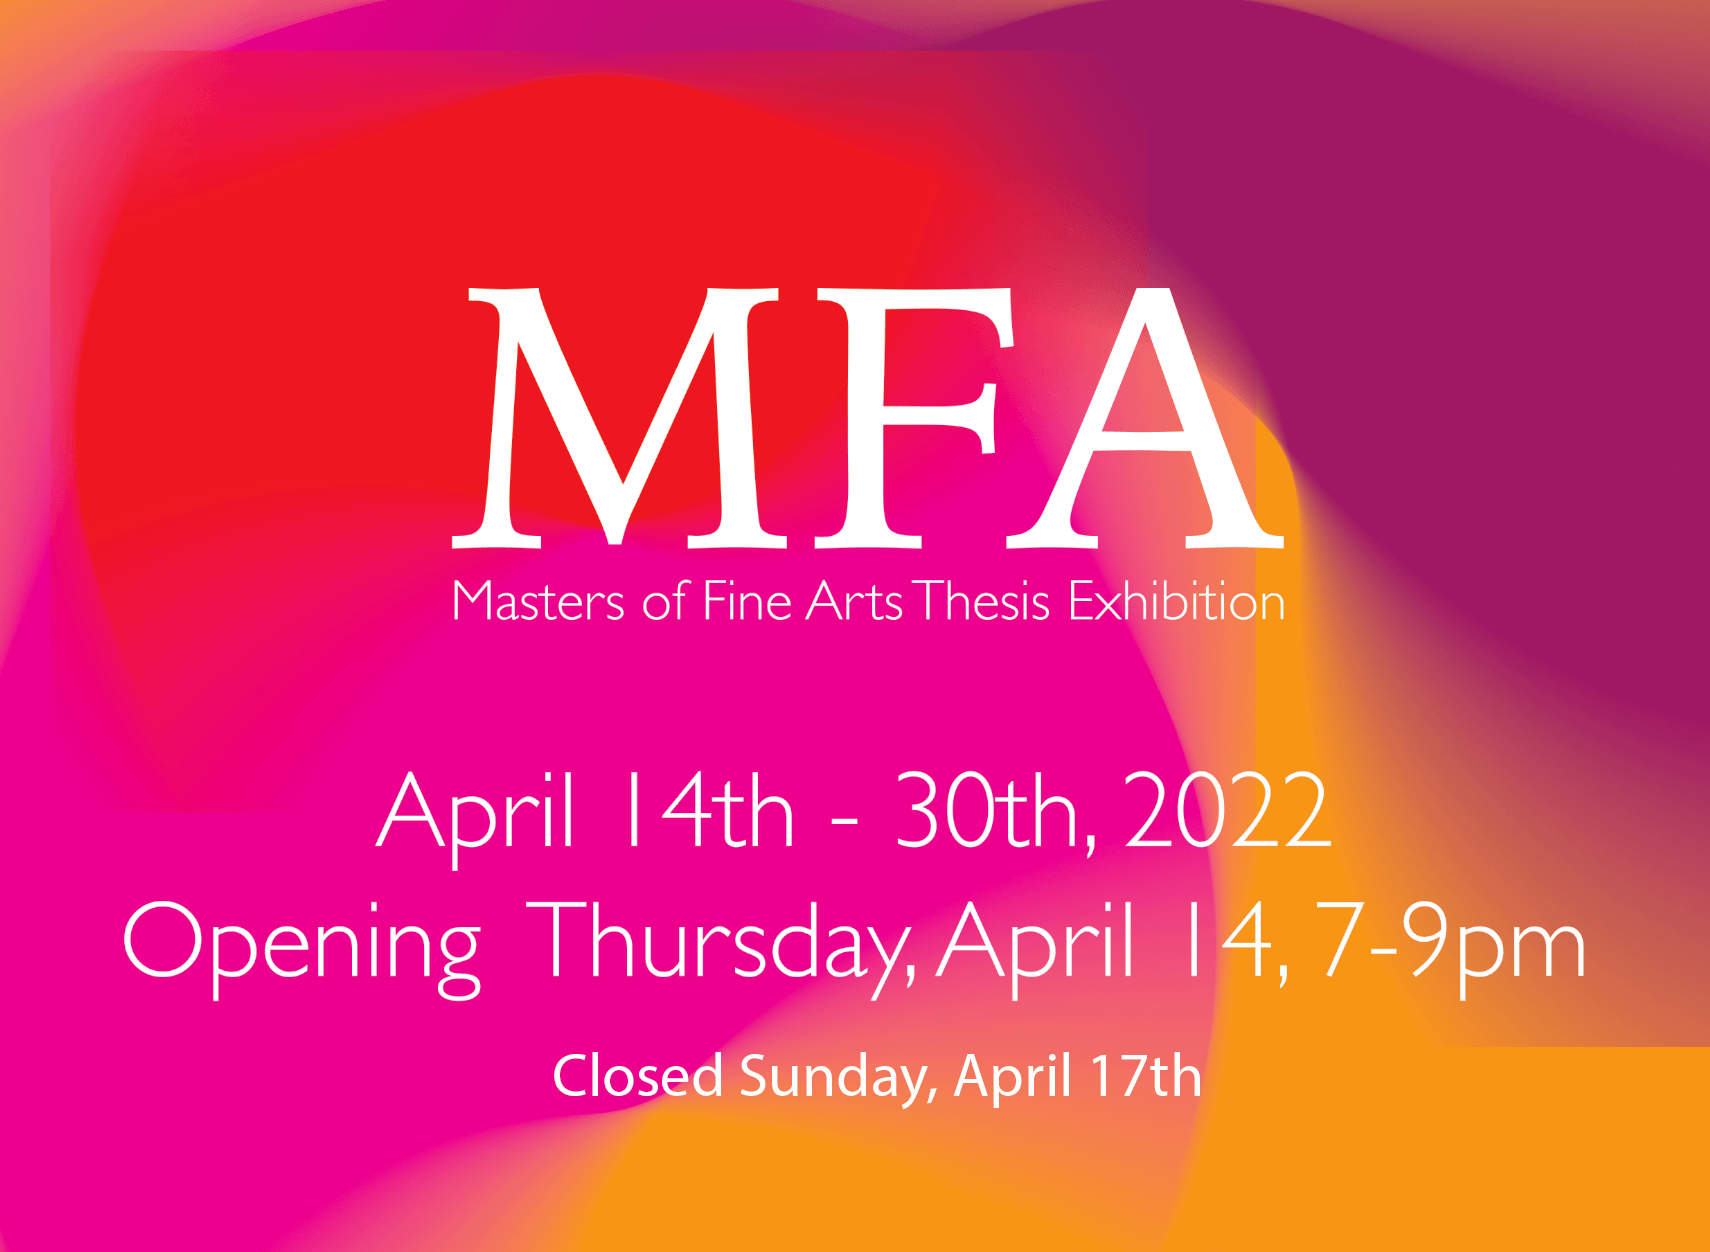 MFA Thesis Exhibition: April 14 - 30, 2022. Opening Thurs, April 14 at 7pm. Closed Sunday, April 17